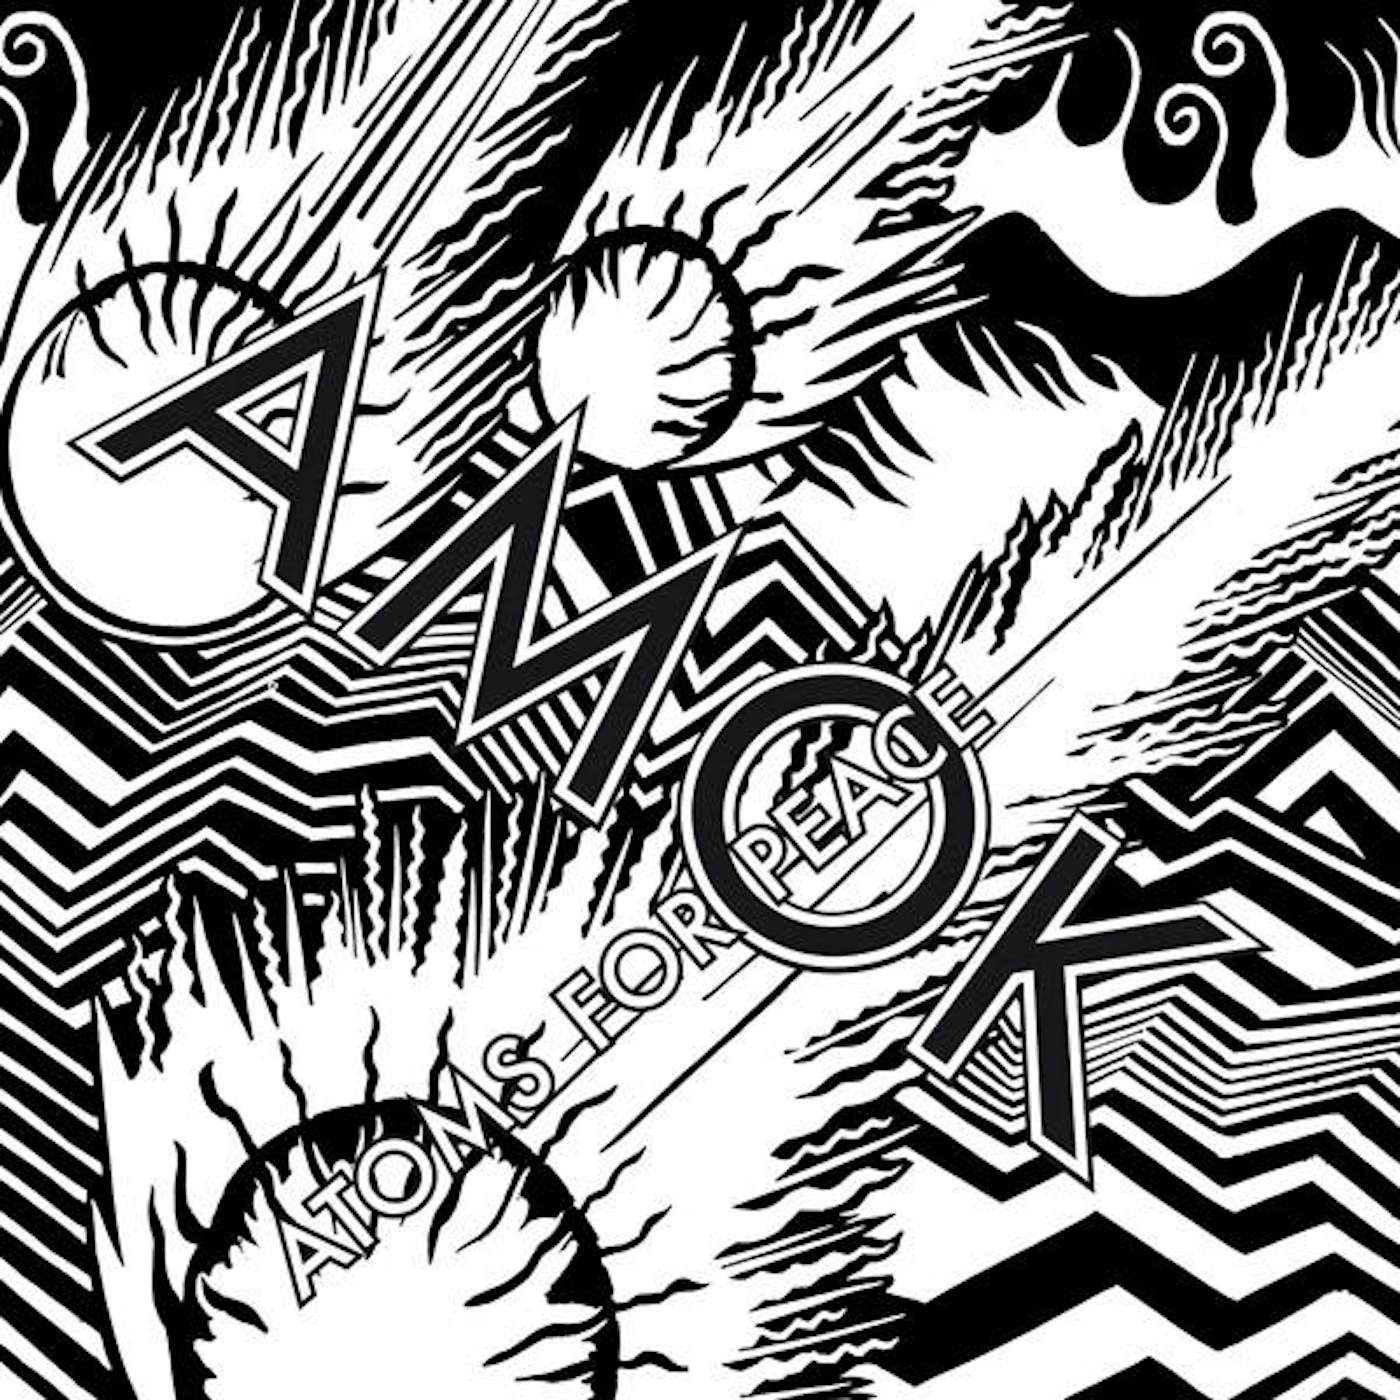 Atoms For Peace AMOK Vinyl Record